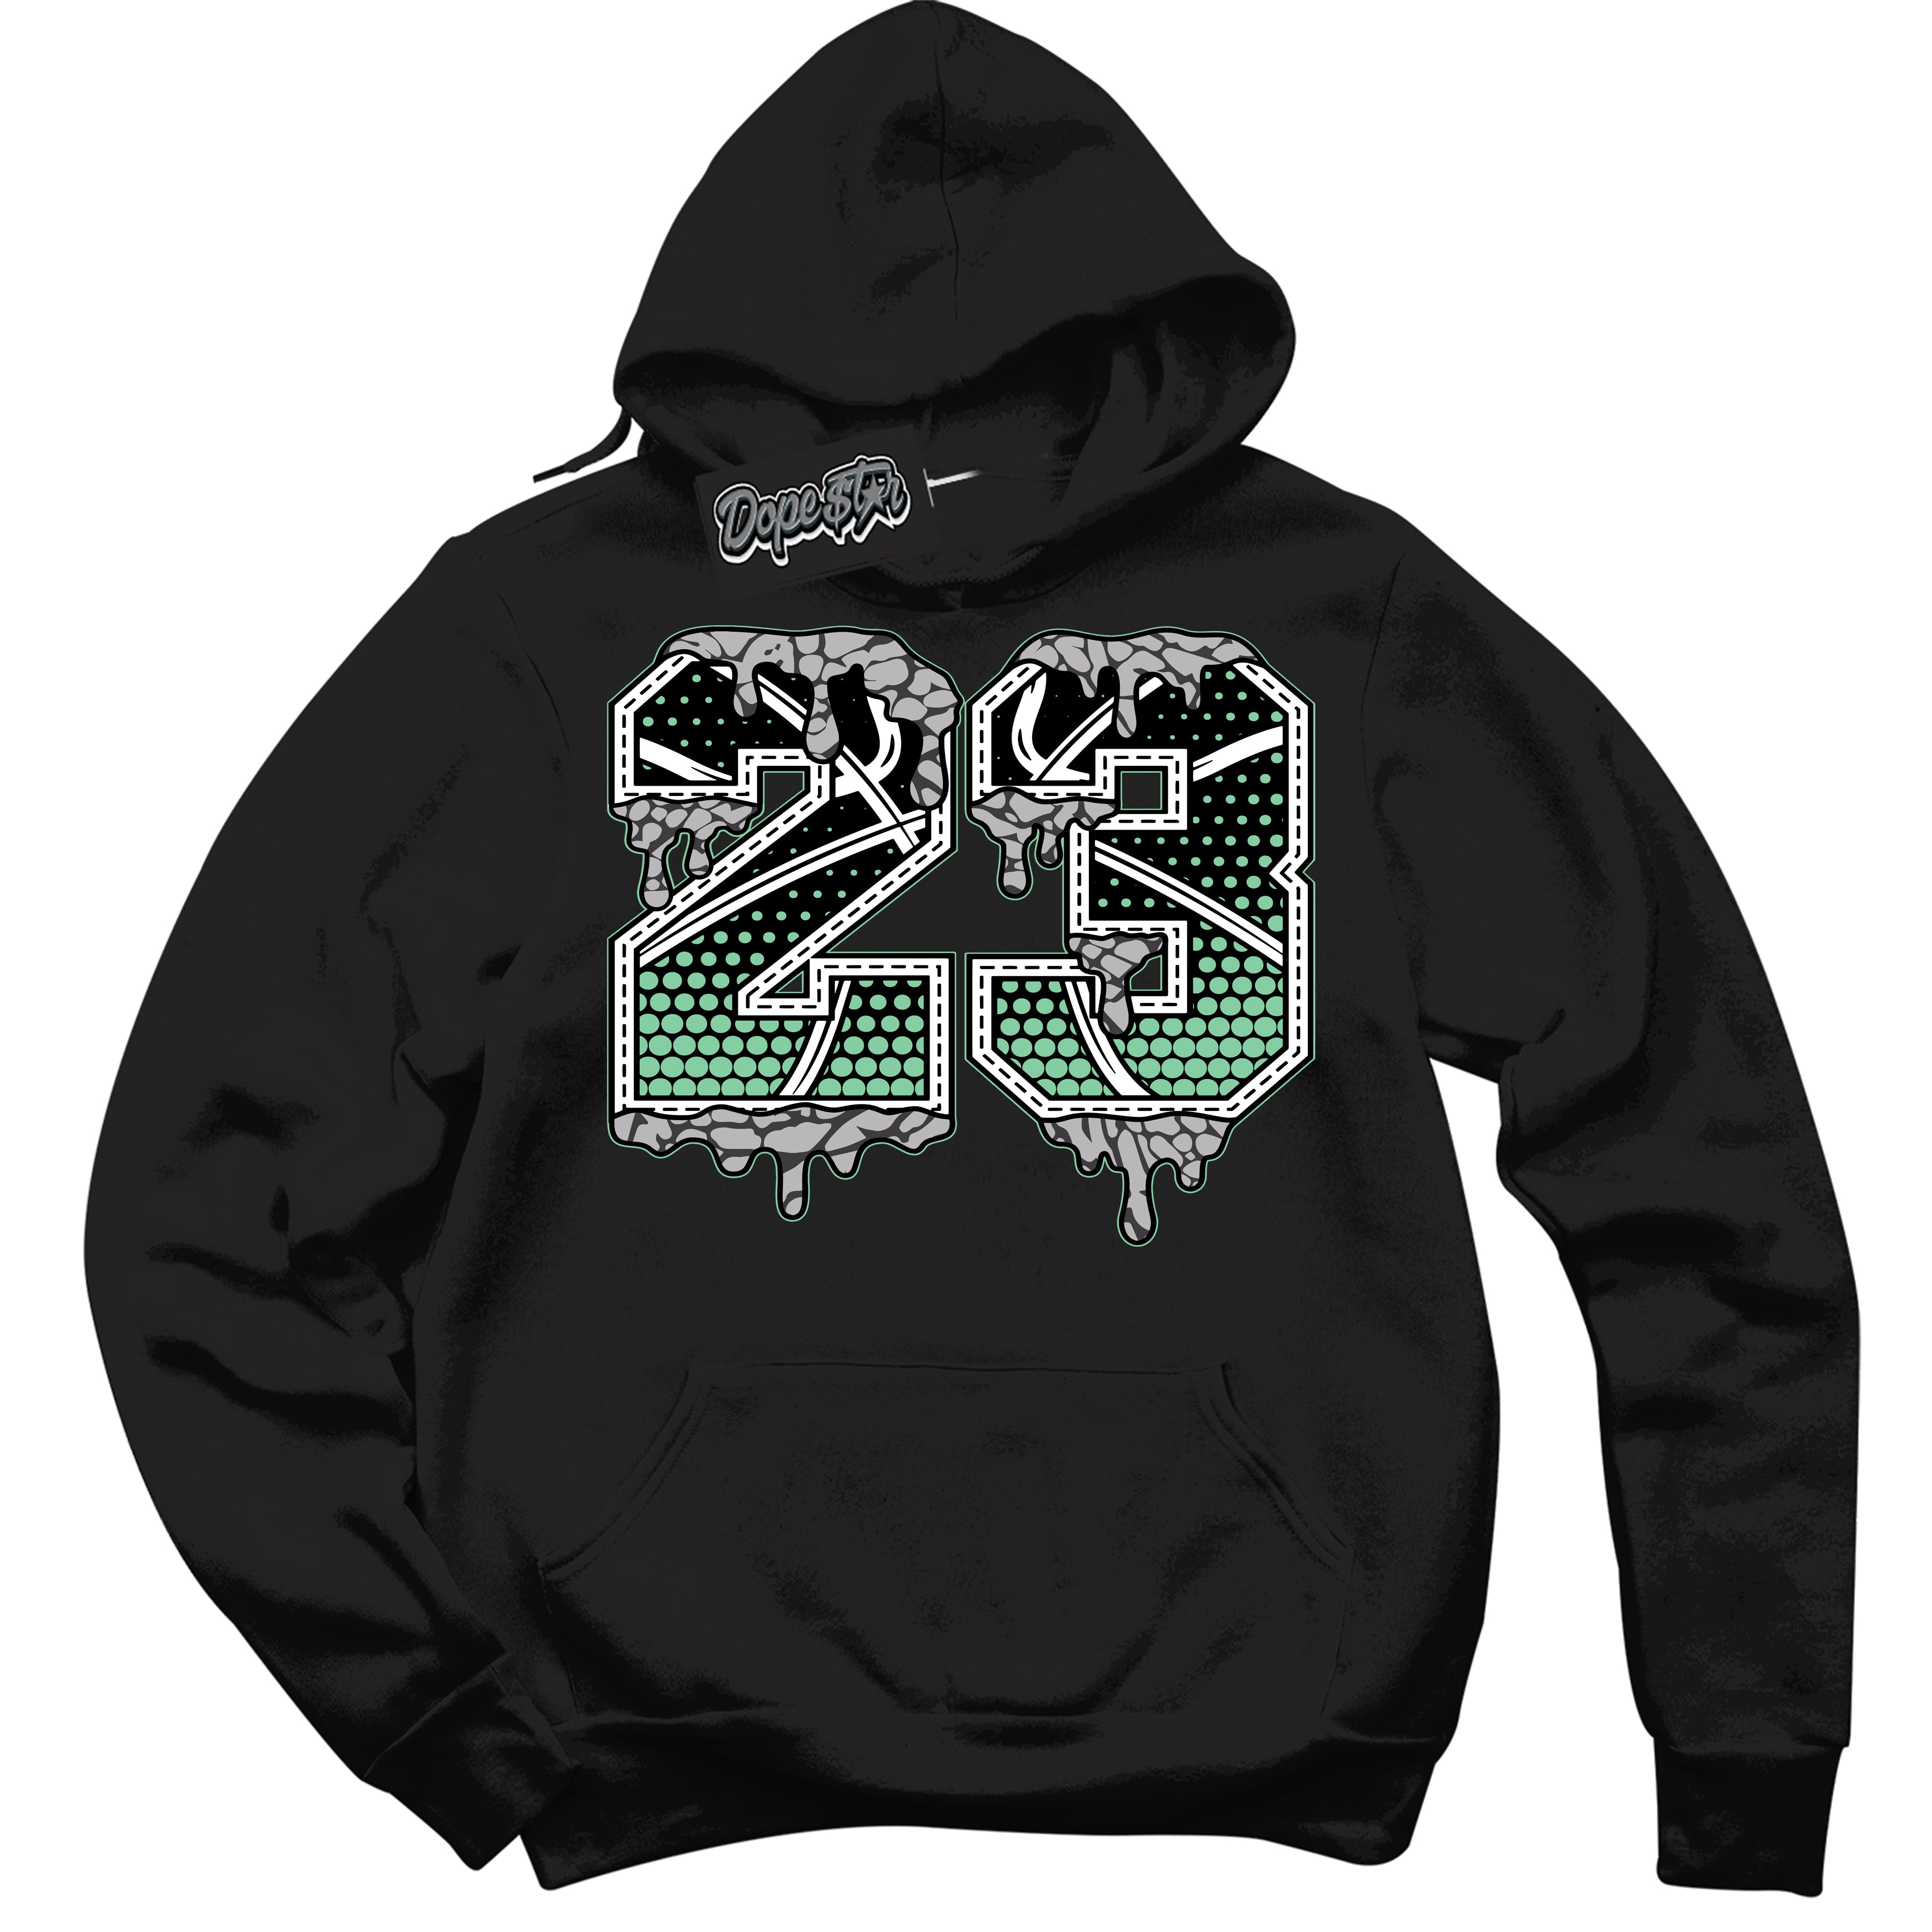 Cool Black Graphic DopeStar Hoodie with “ 23 Ball “ print, that perfectly matches Green Glow 3S sneakers